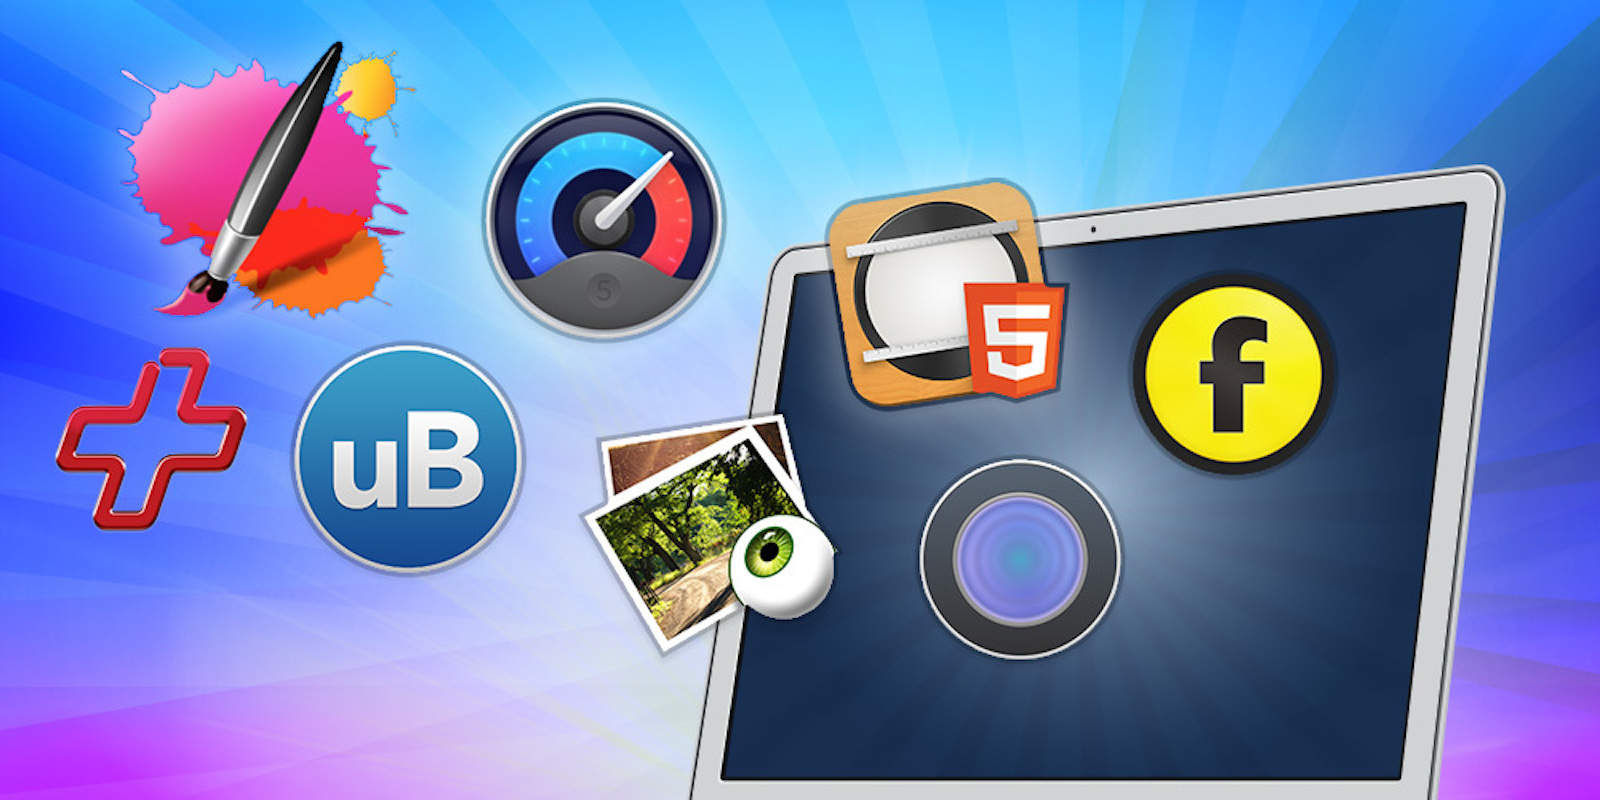 Now's your last chance to save on these top-notch Mac creativity and productivity apps.